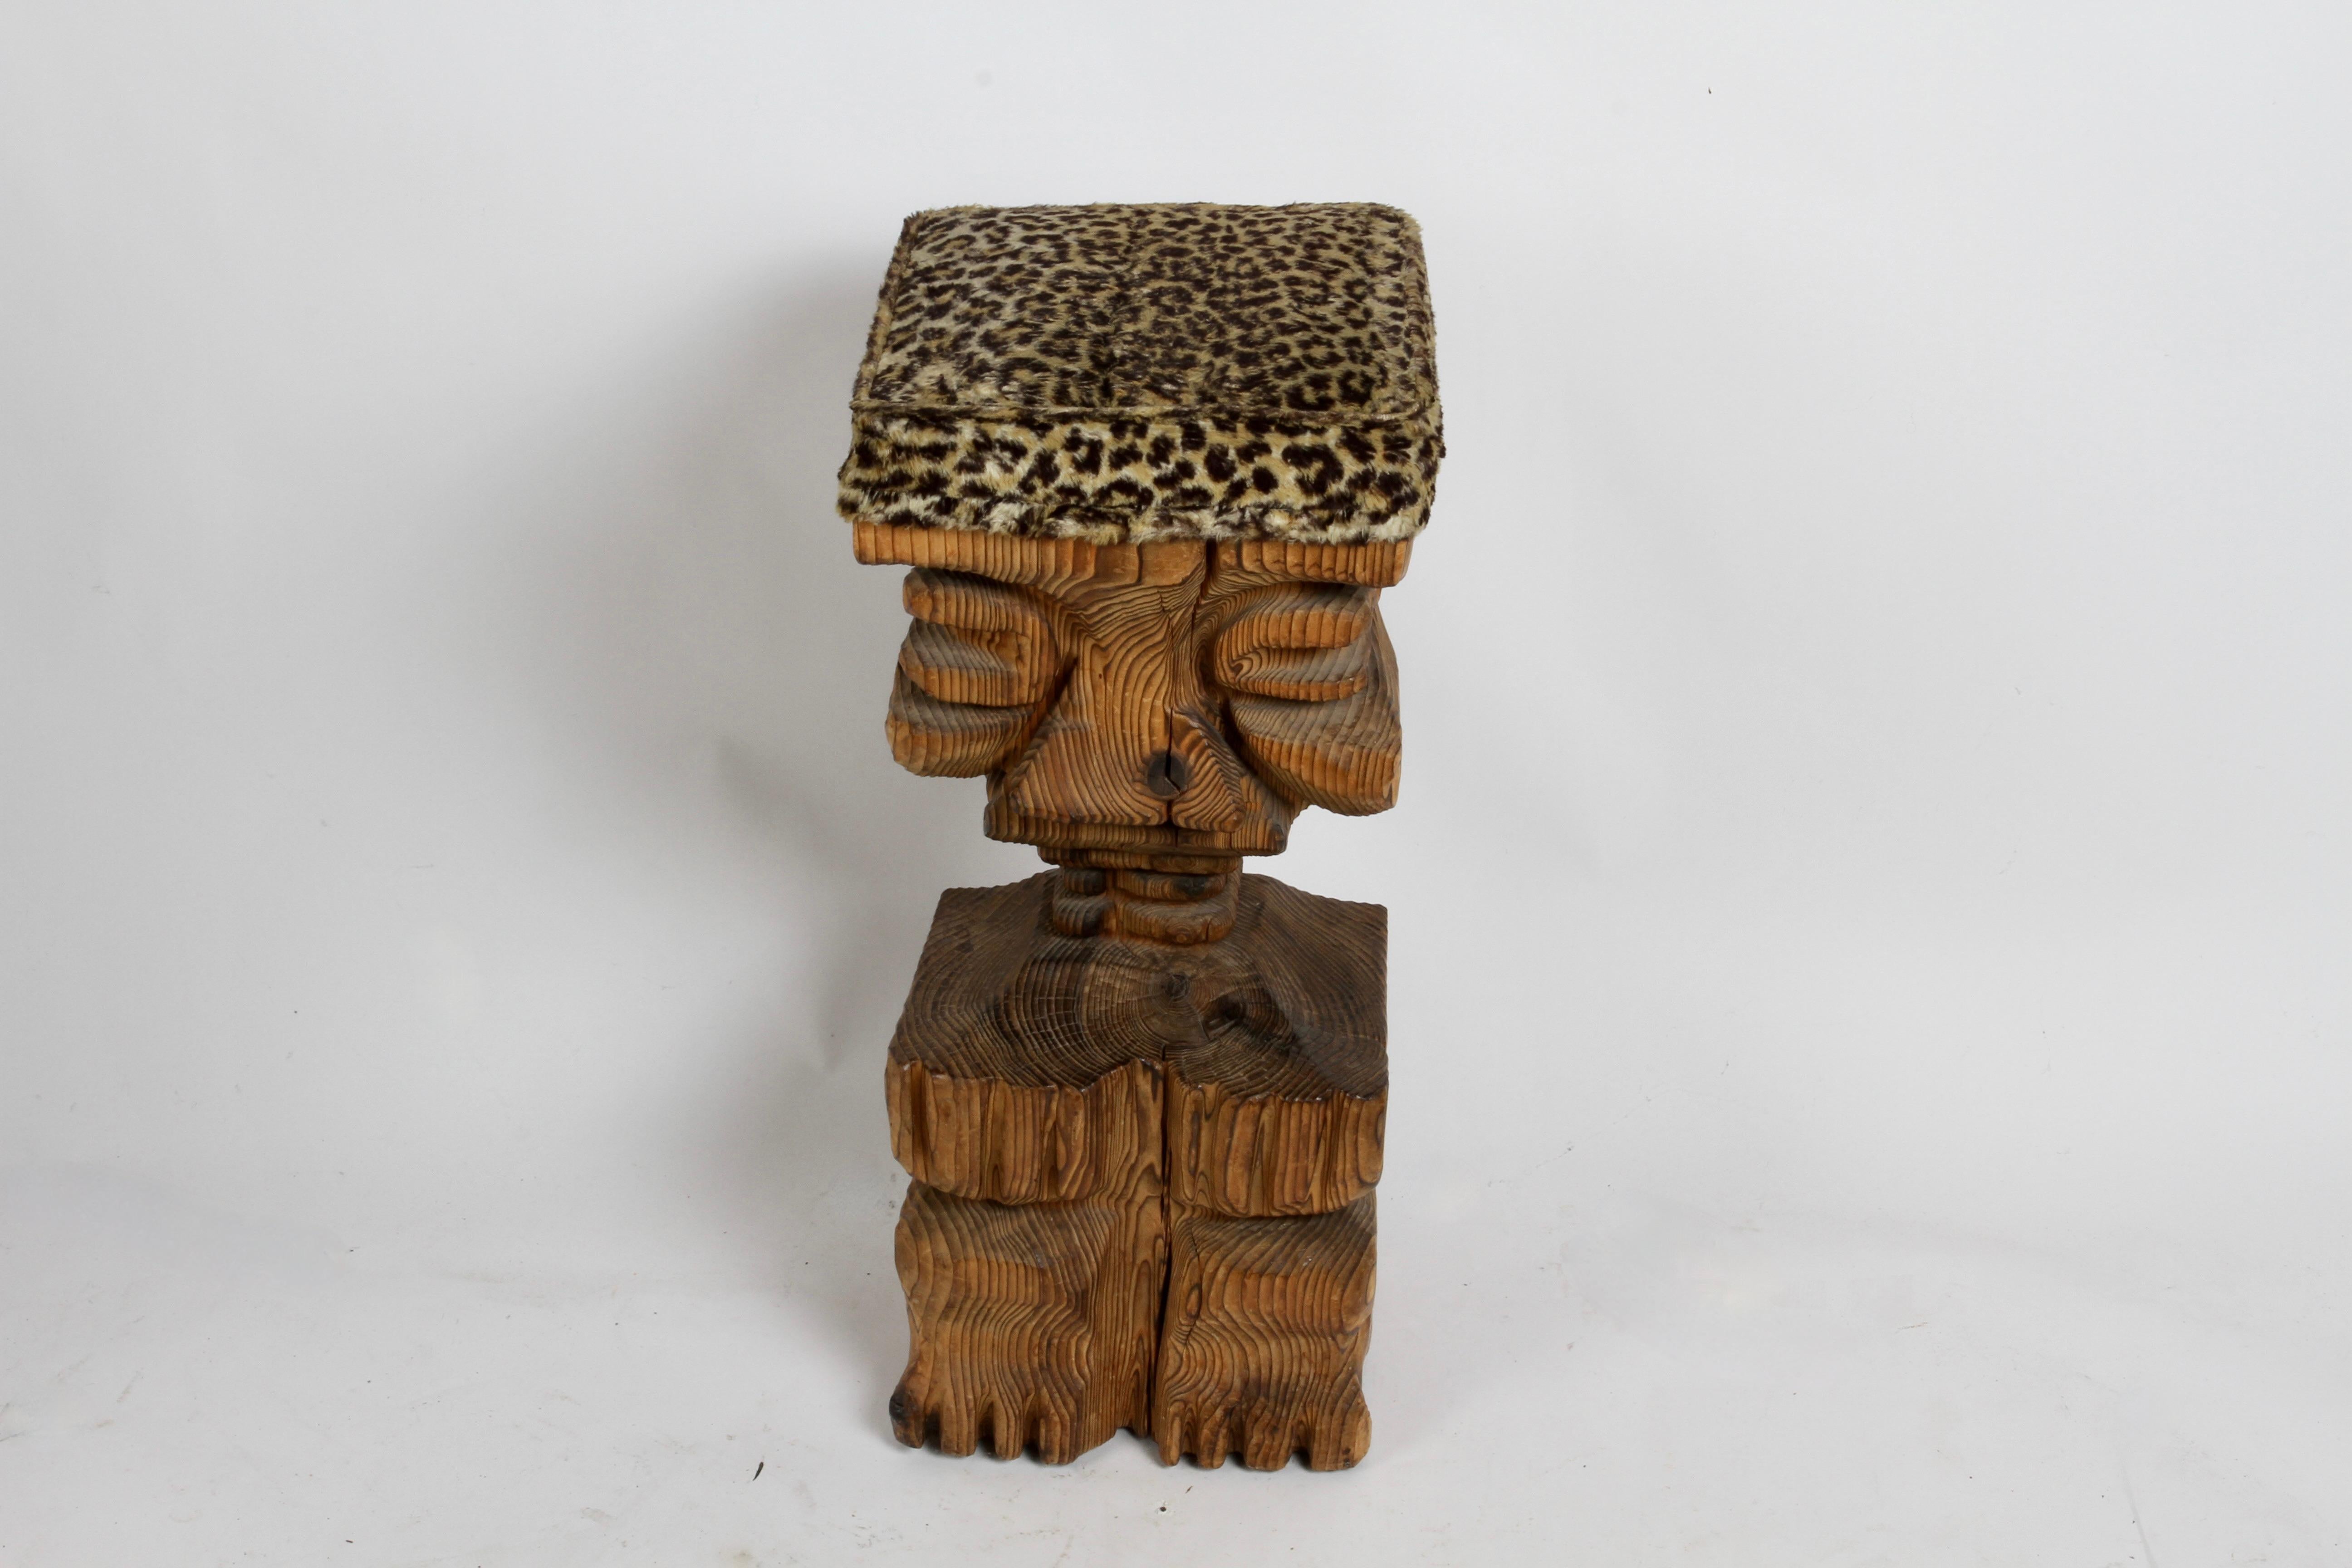 Single Mid-Century Witco Tiki barstool - tribal sitting figure with carved face and original faux leopard upholstery designed by William Westenhaver. In nice original condition, no damage noted to wood. Upholstery shows wear. 



In 1958, a small